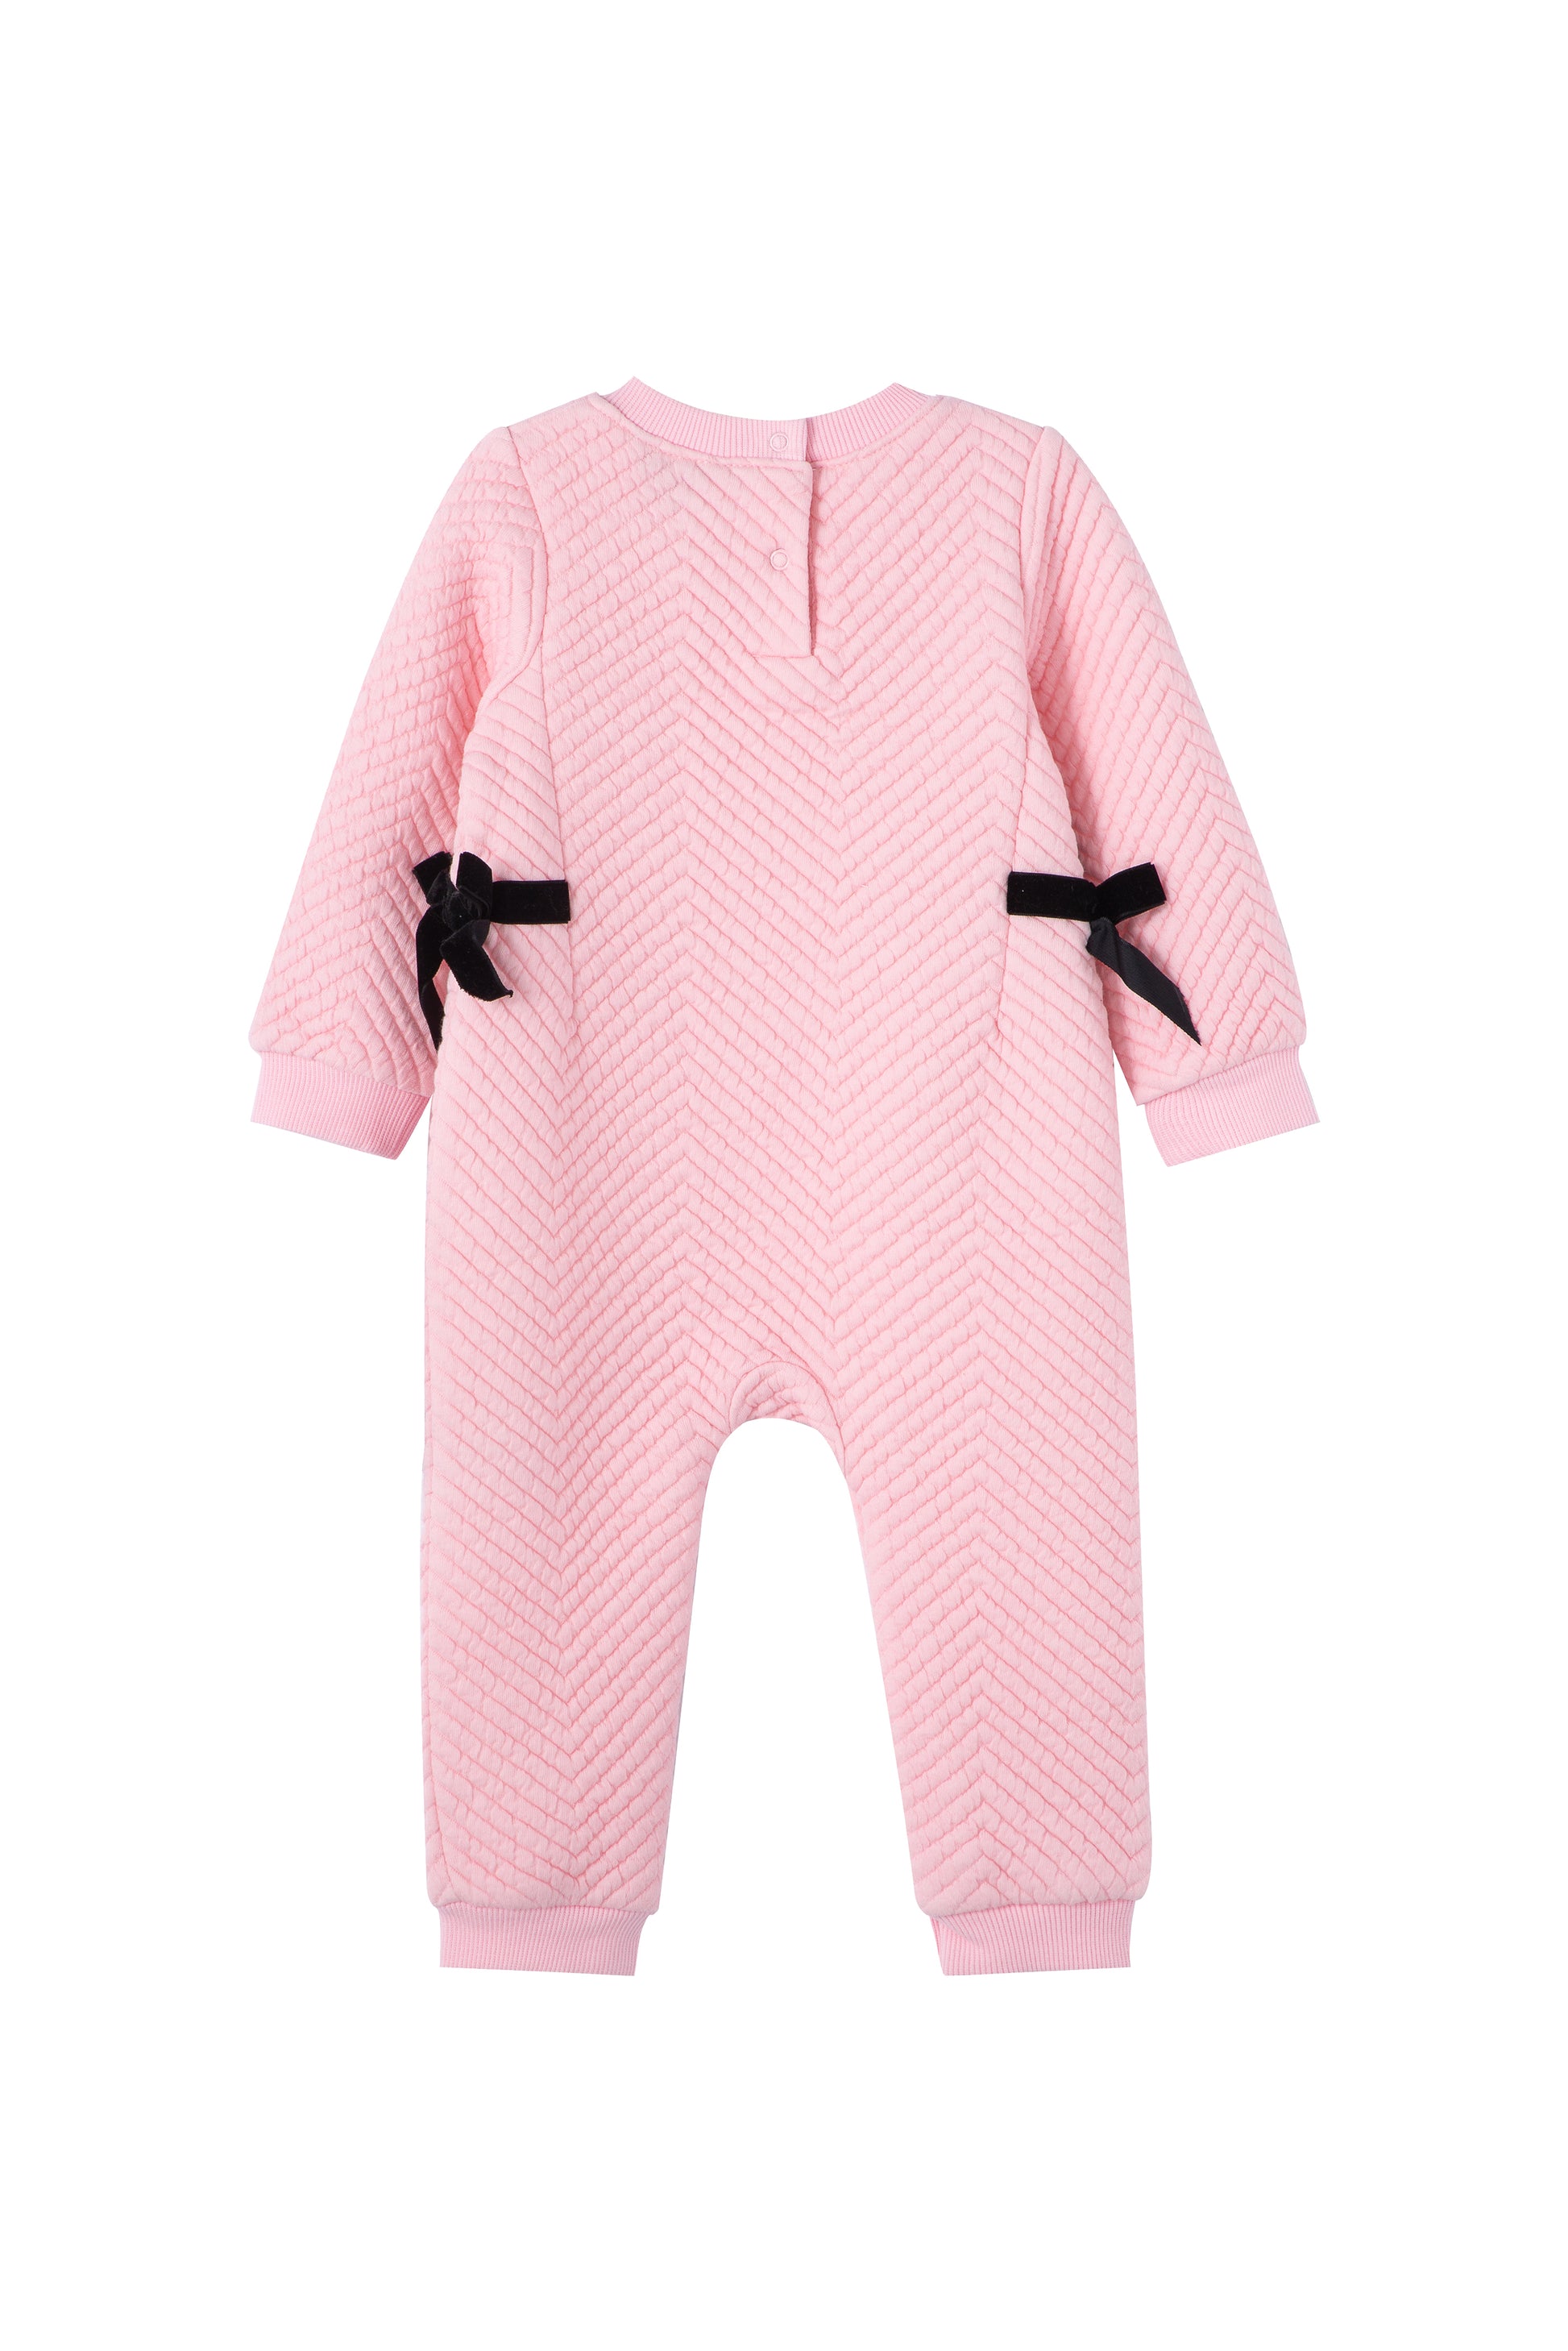 Back view of pink quilted jumpsuit with black side bows 